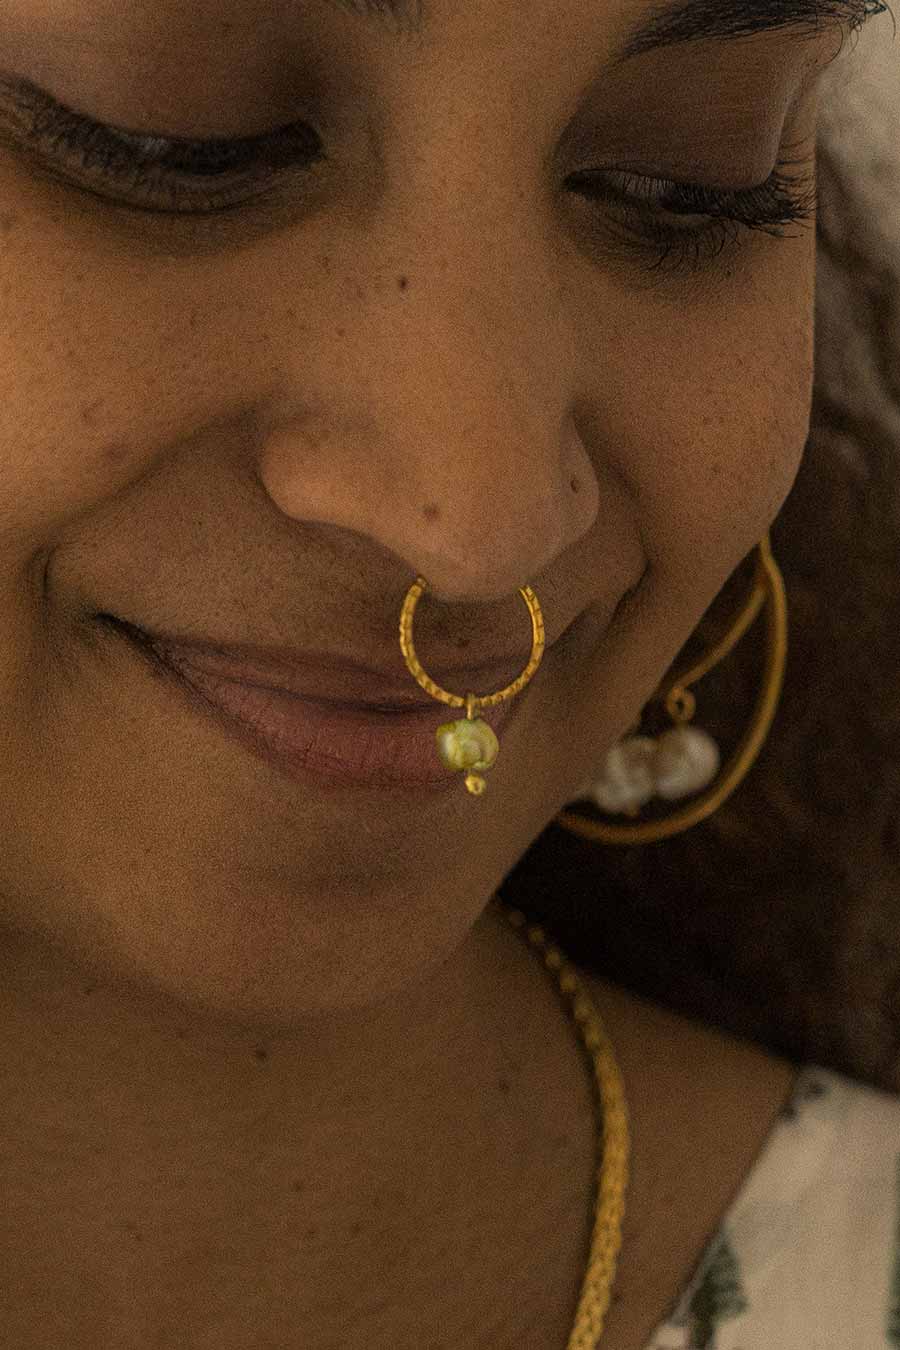 Prerna Inc. - CZ Stud 18Kt Gold Wired Nose Ring #nosering #accessories  #nosestud #bodyjewelry #wirednosepins Keep Calm Shop @prerna_inc | Facebook